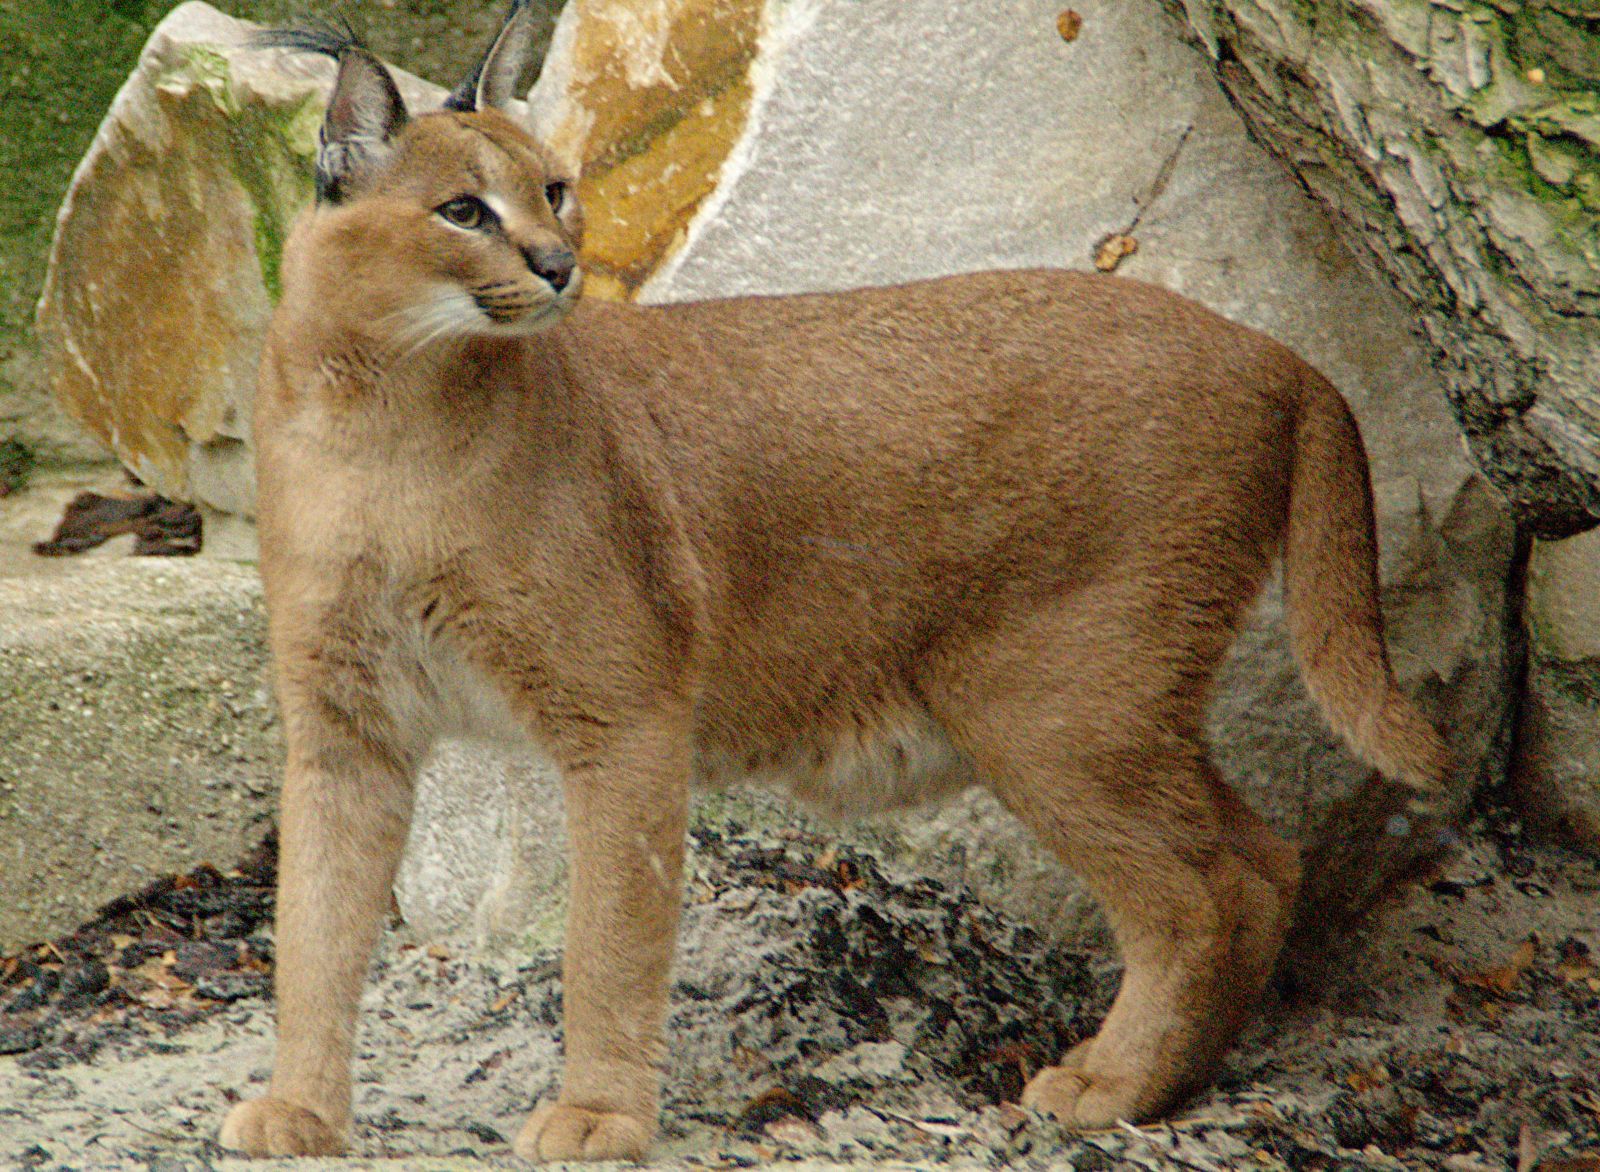 Check out Israel's 10 most unusual wild animals - ISRAEL21c